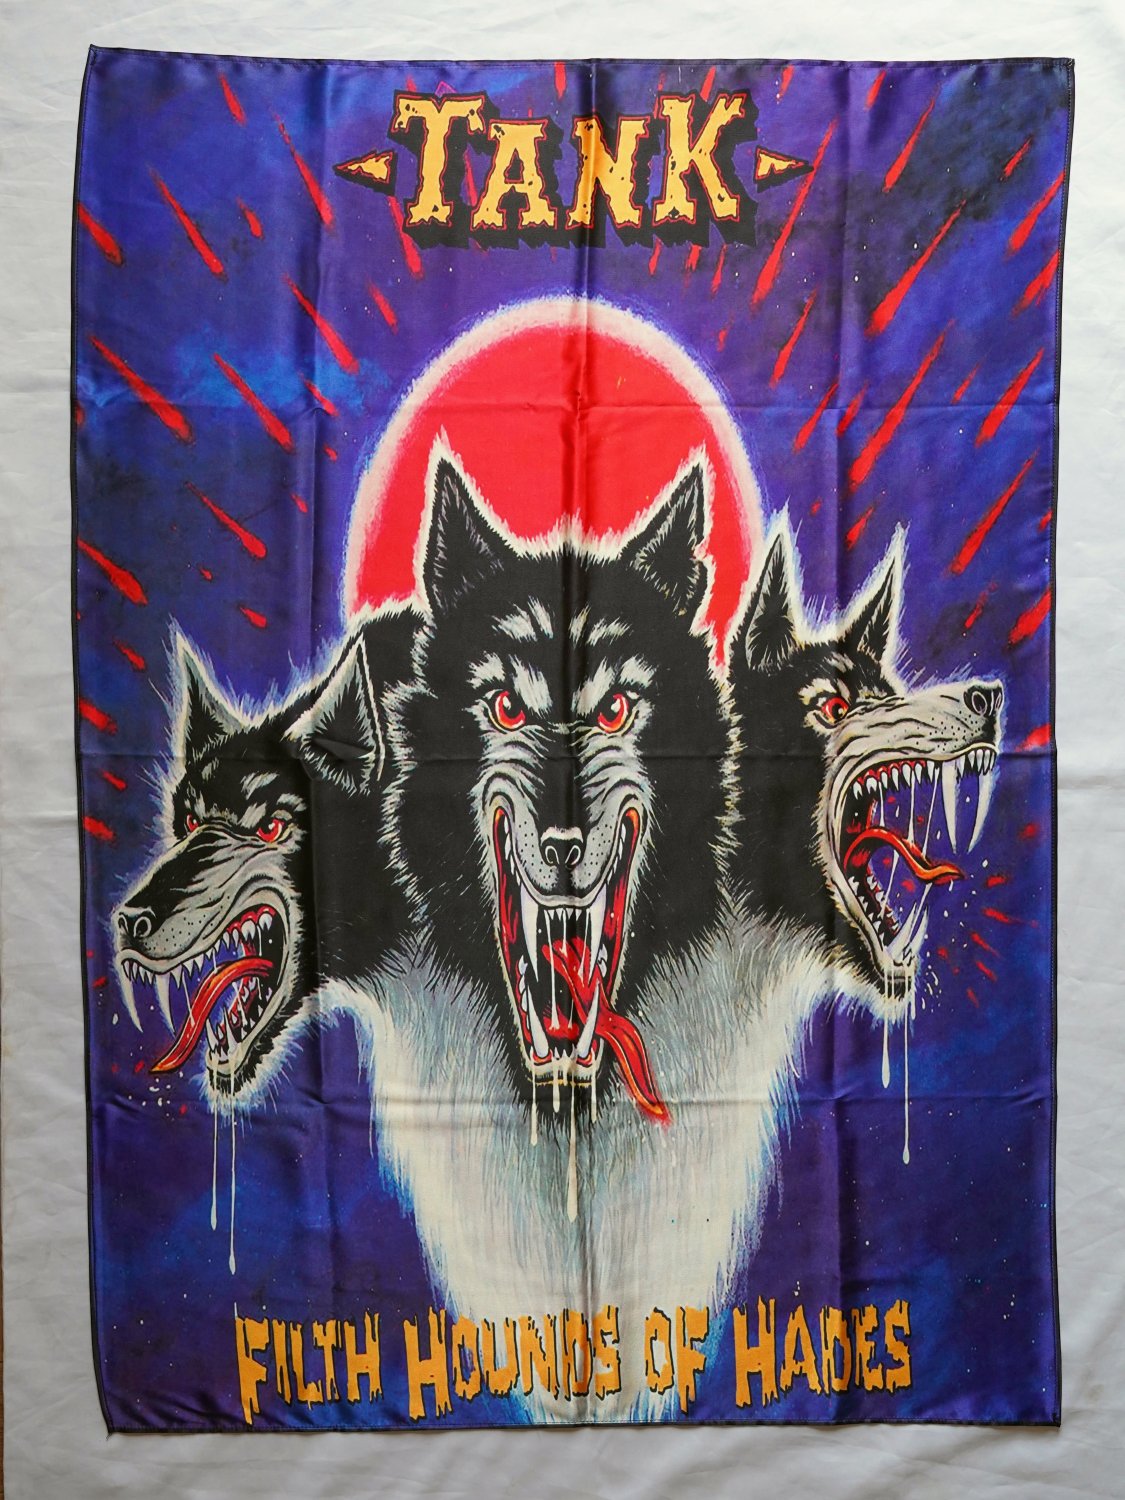 TANK - Filth hounds of Hades FLAG cloth poster banner Heavy METAL NWOBHM